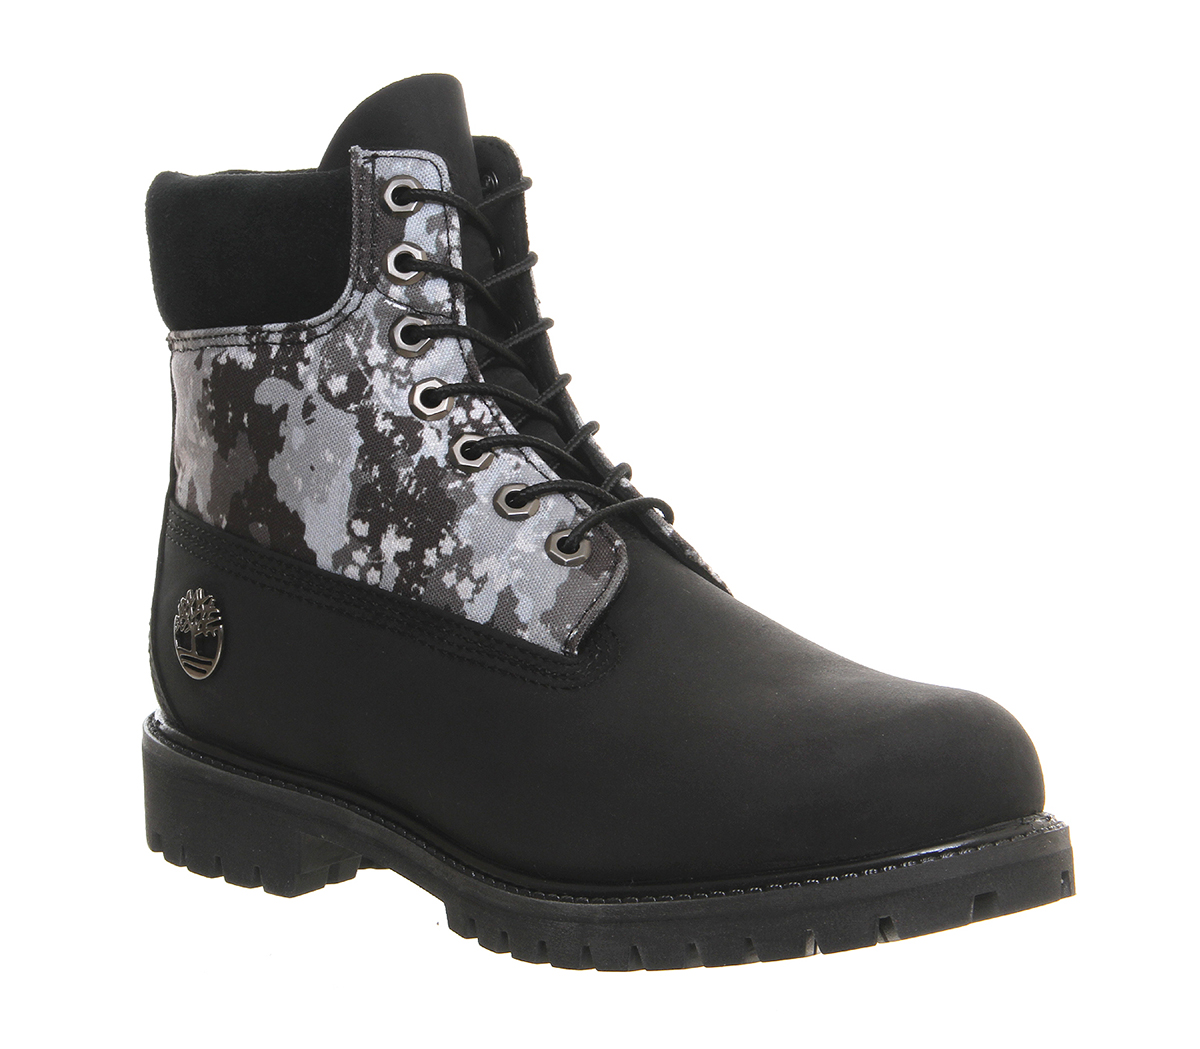 Timberland 6 In Buck Boots Black Camo - Men’s Boots